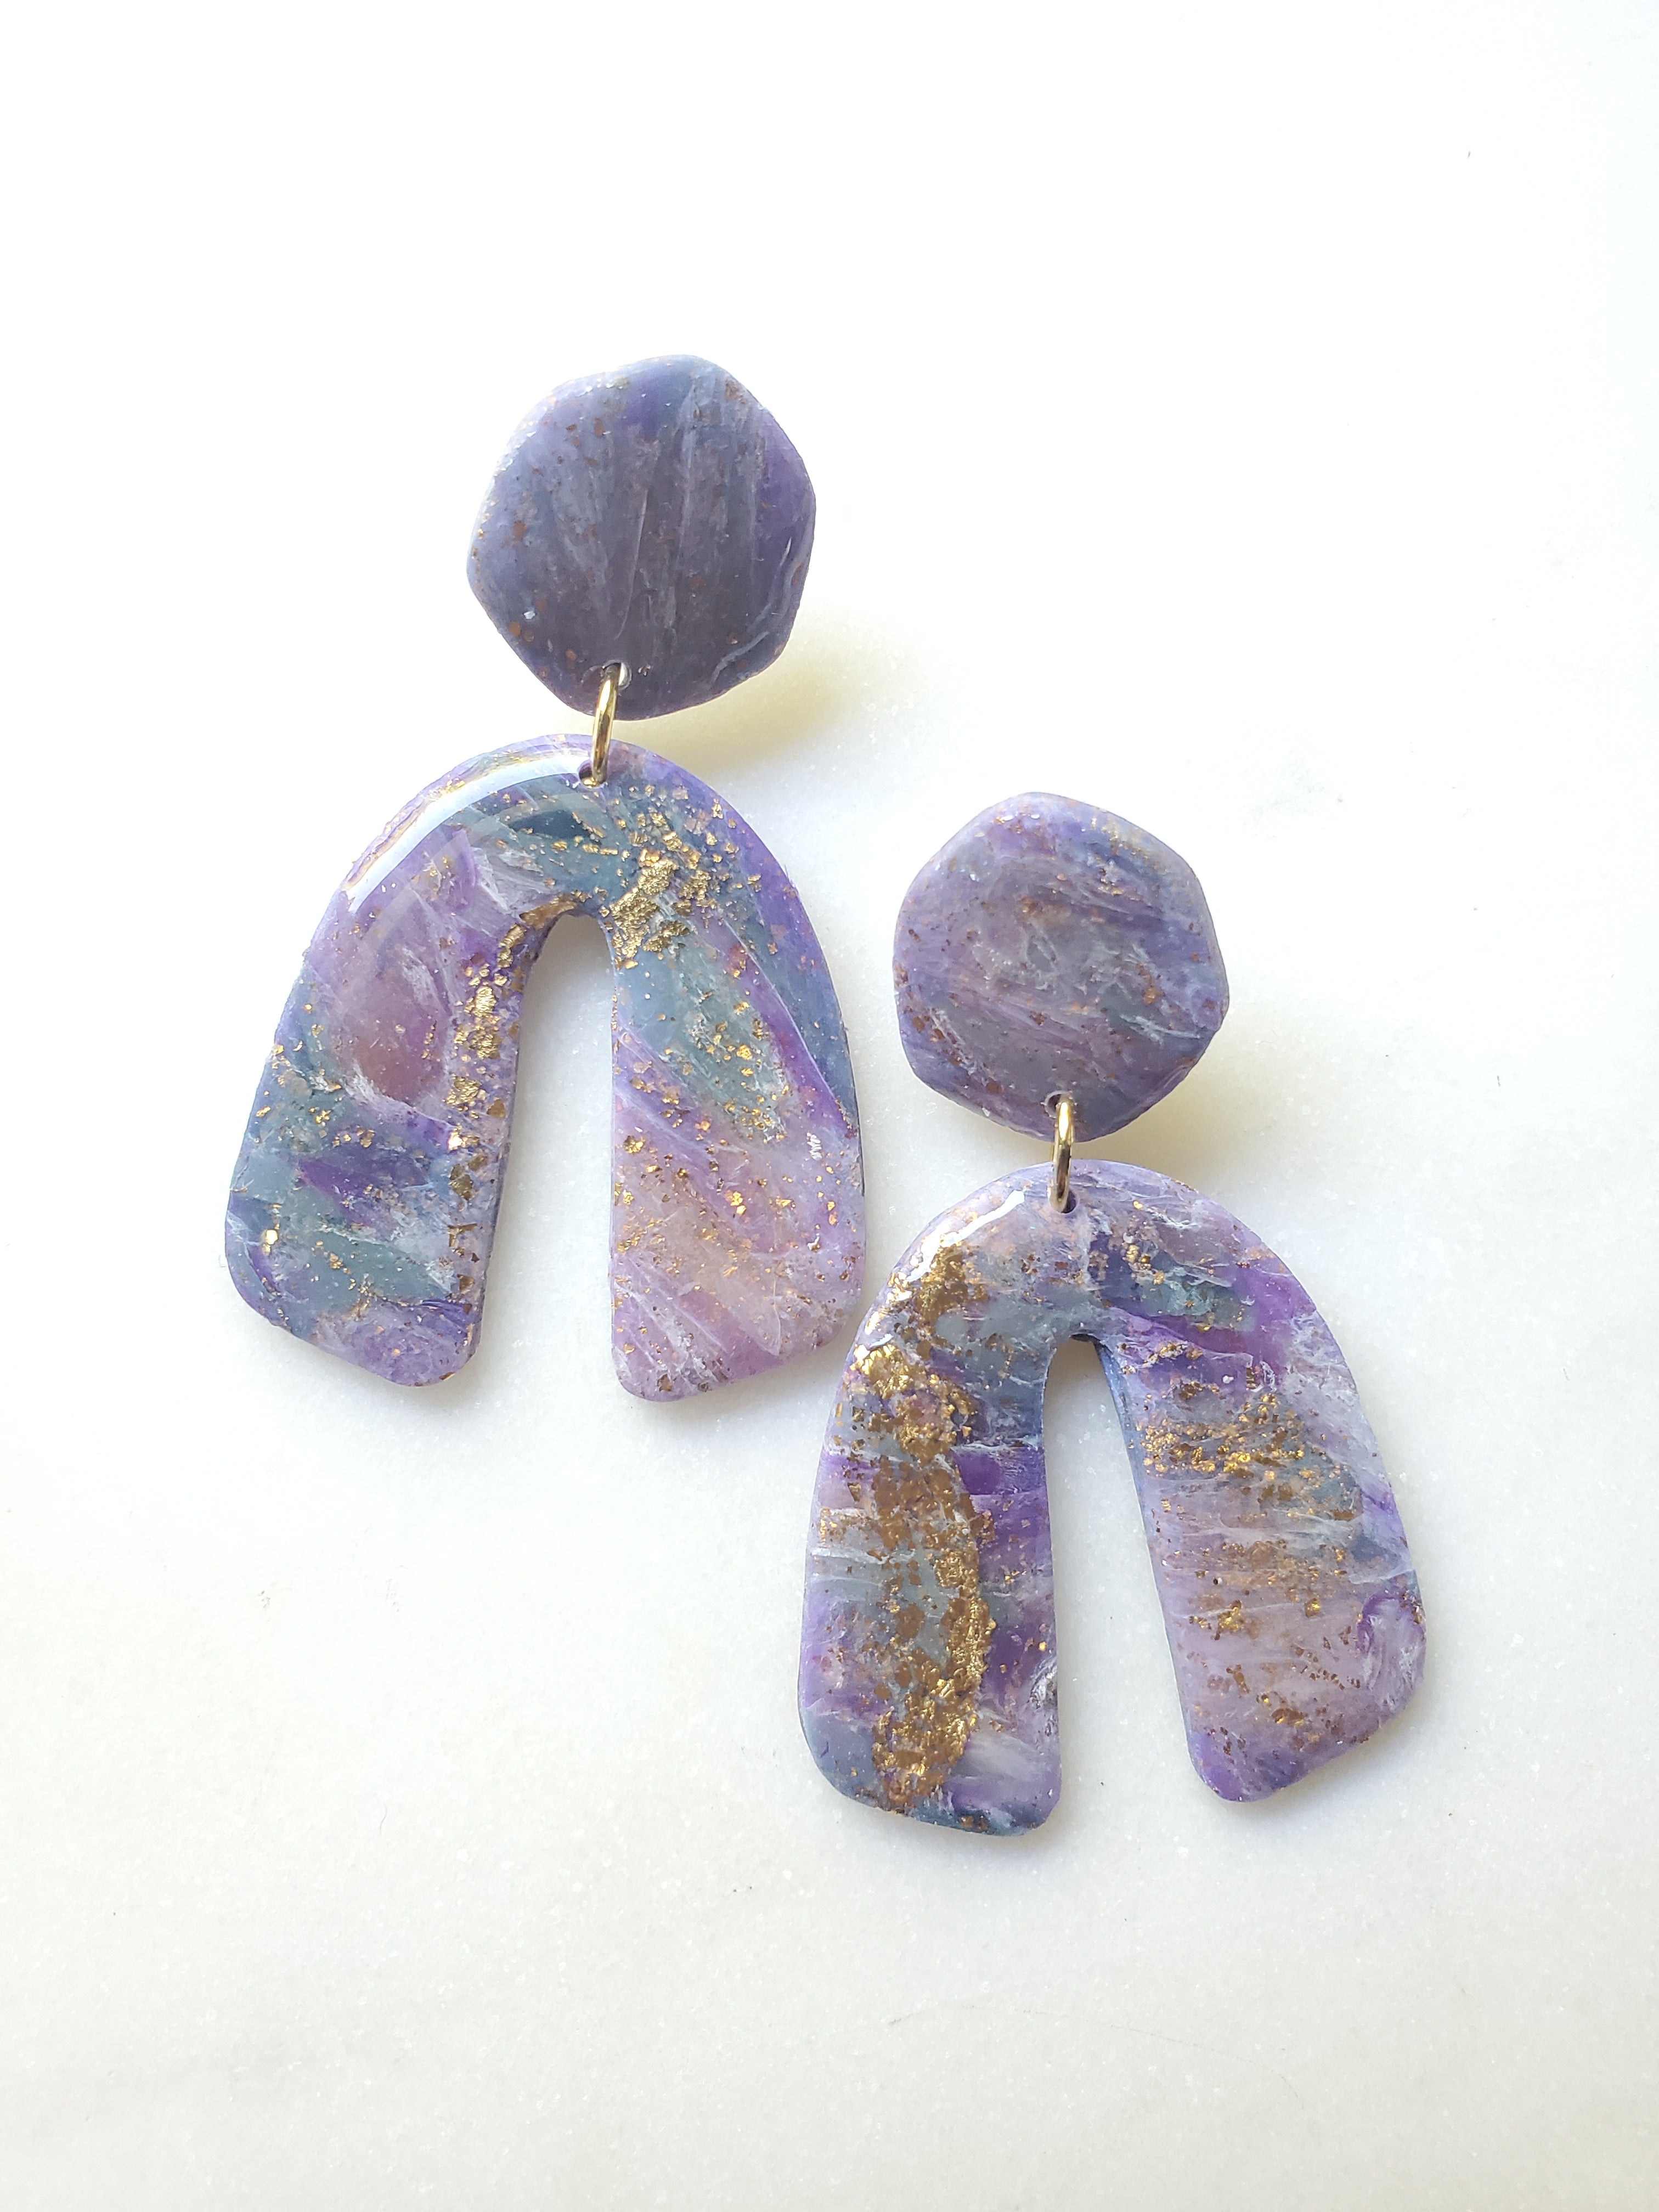 Agate Inspired Statement Earrings - Aqua/Violet Arch